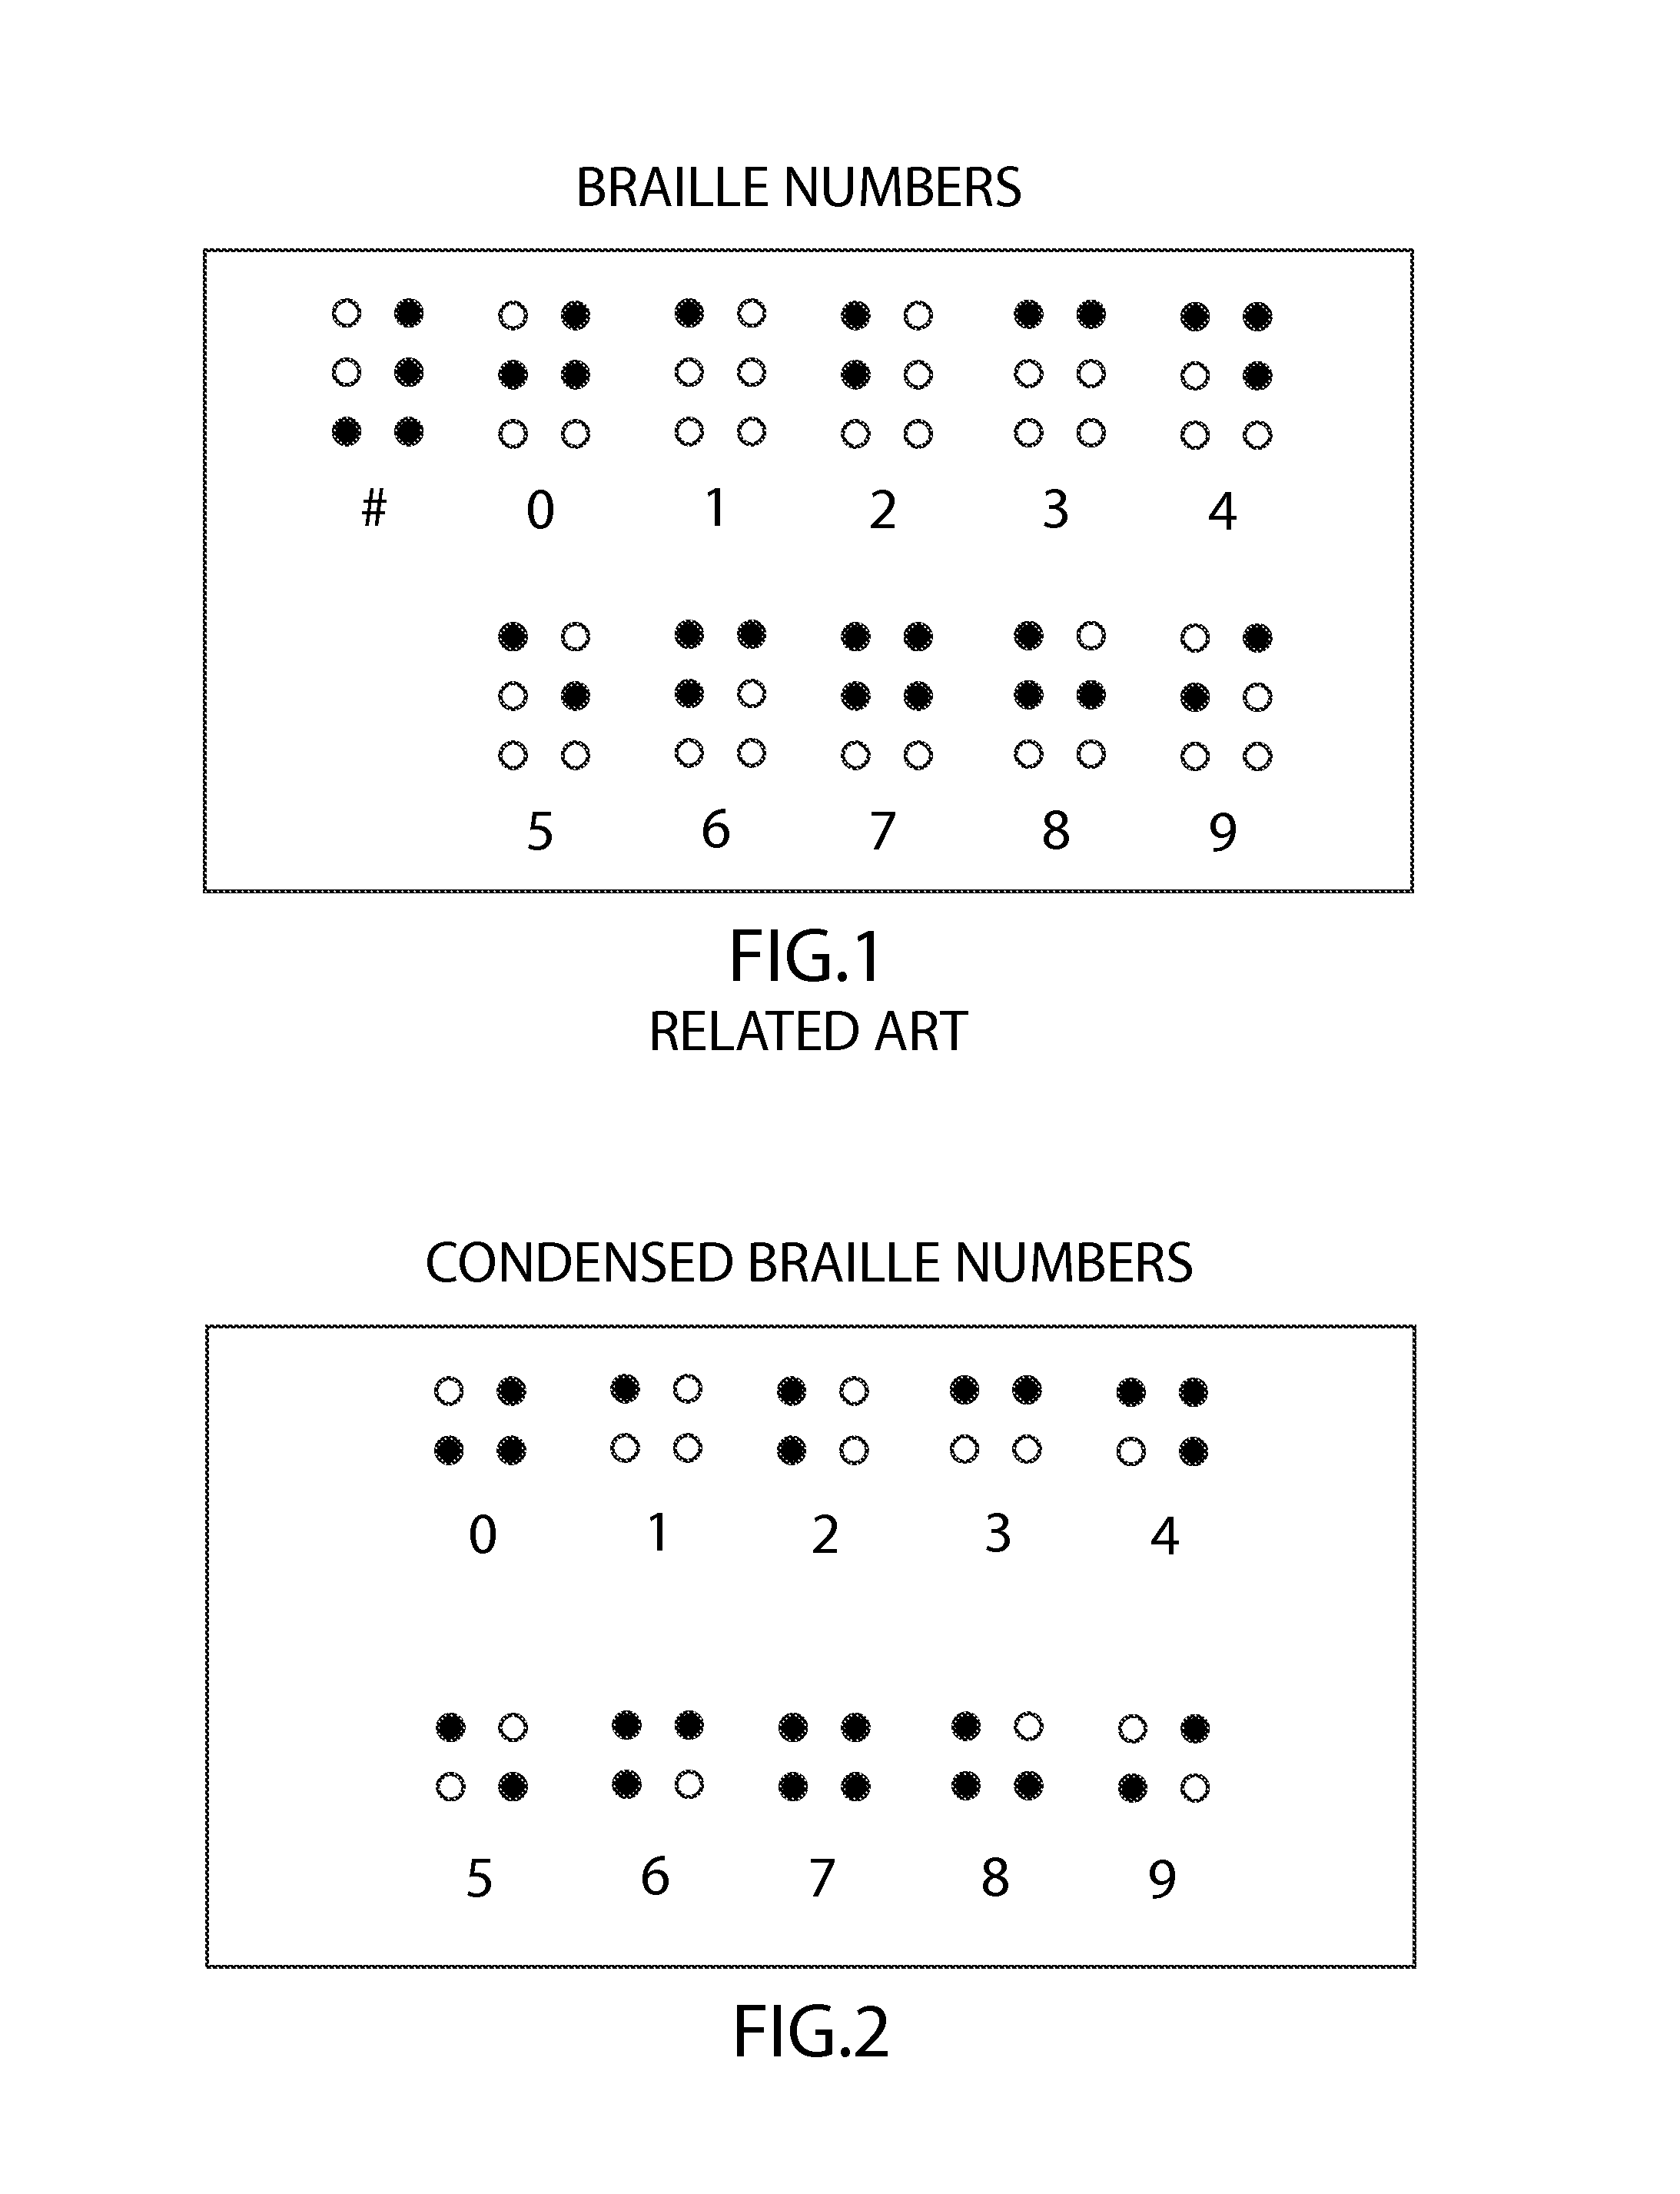 Active braille timepiece & related methods